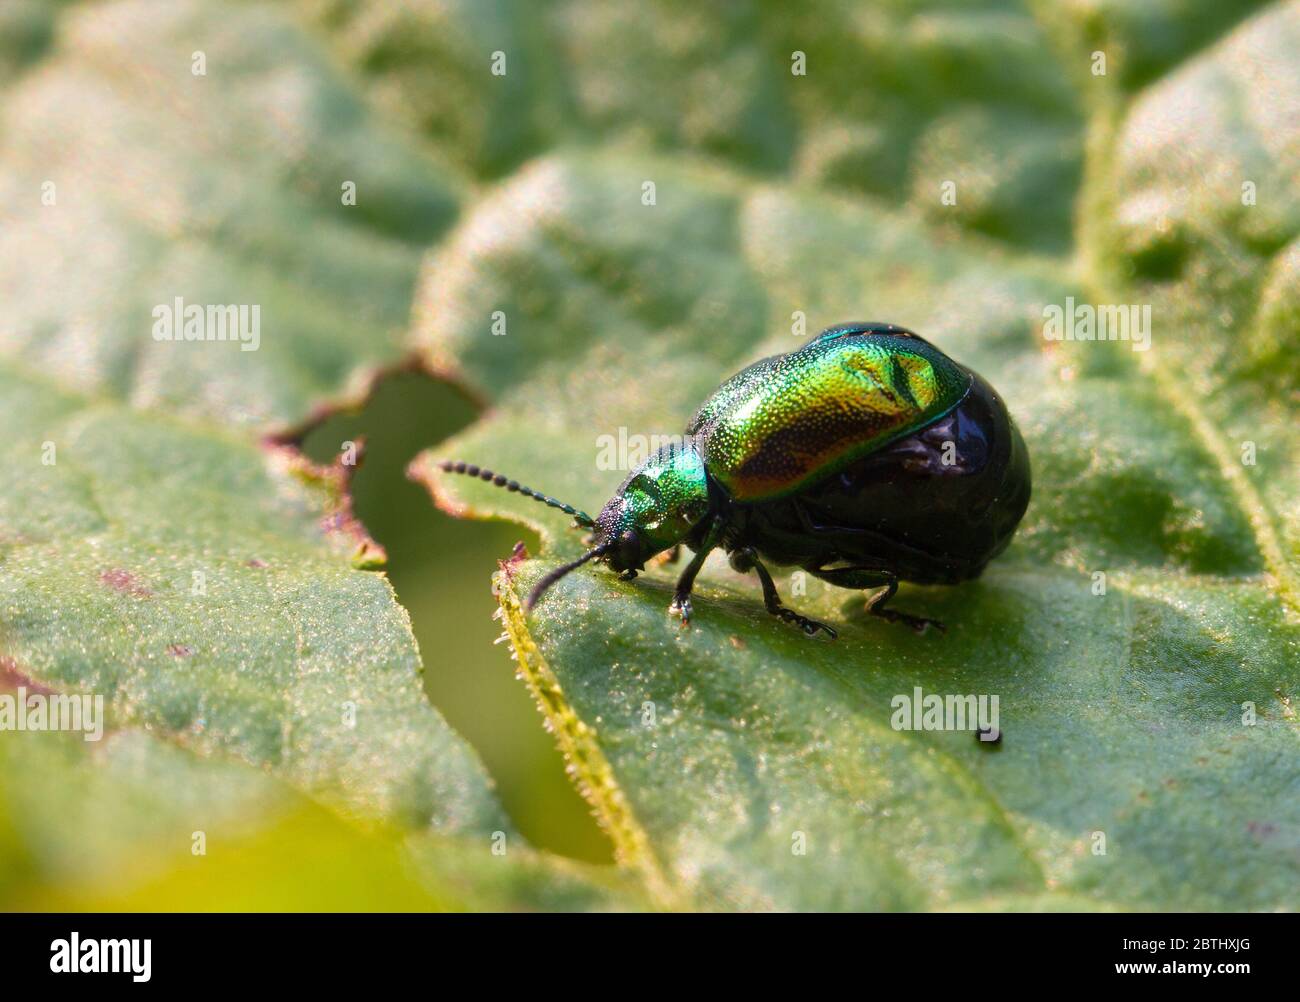 Insect of the beetle family Chrysomelidae, commonly known as leaf beetle. Chrysolina fastuosa, also known as the dead-nettle leaf beetle Stock Photo